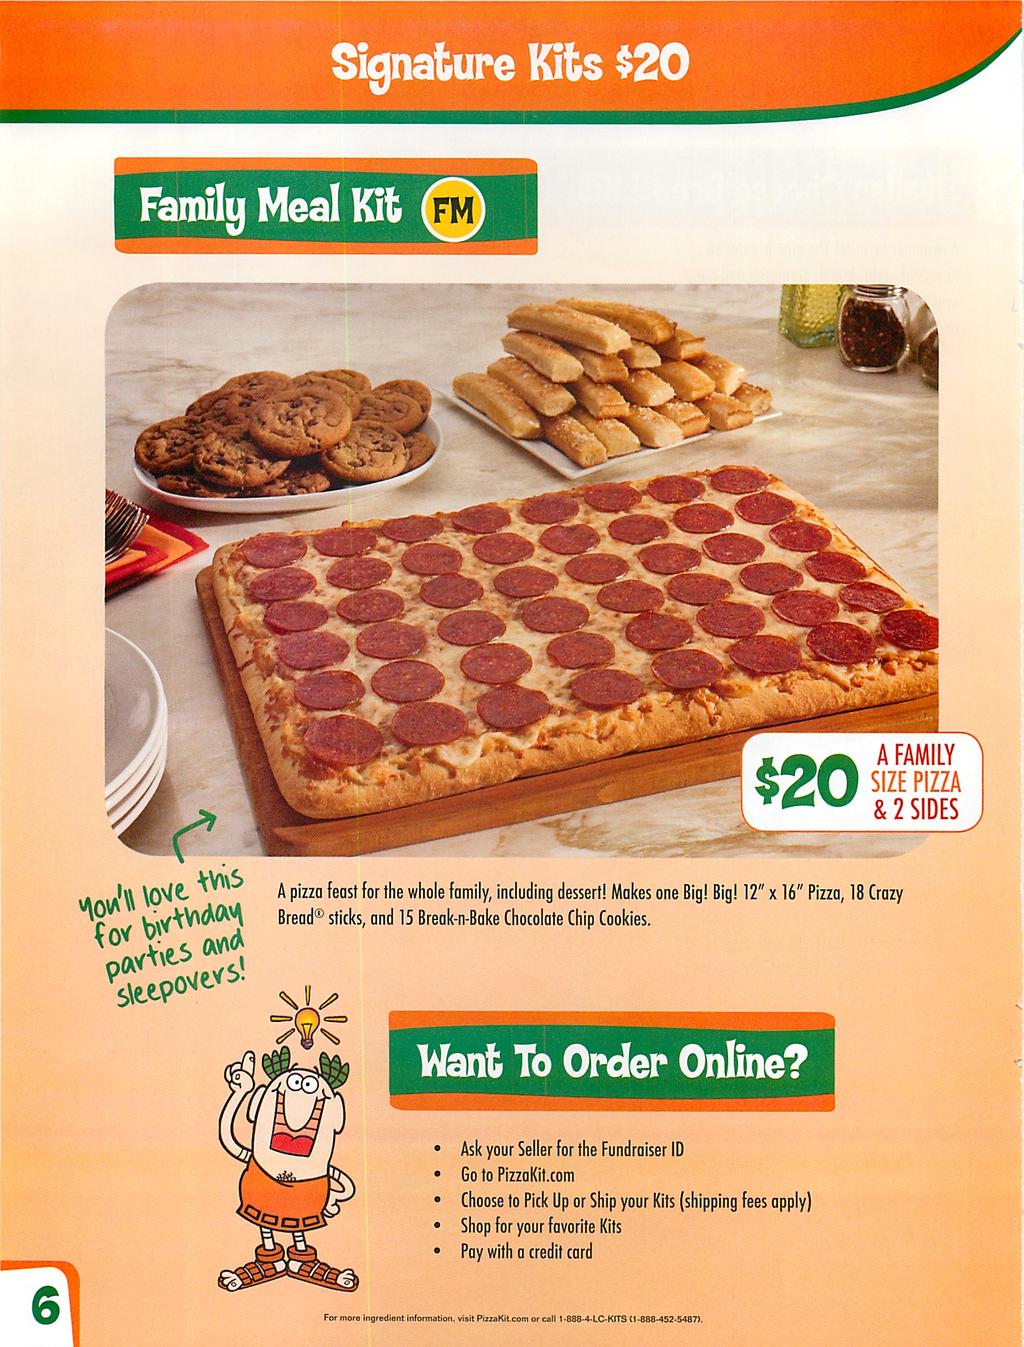 icmature Kits $2 Family Meal Kit ffl) Apizza feast for the whole family, including dessert! Makes one Big! Big! 12" x 16" Pizza, 18 Crazy Bread sticks, and 15 Break-n-Bake Chocolate Chip Cookies.